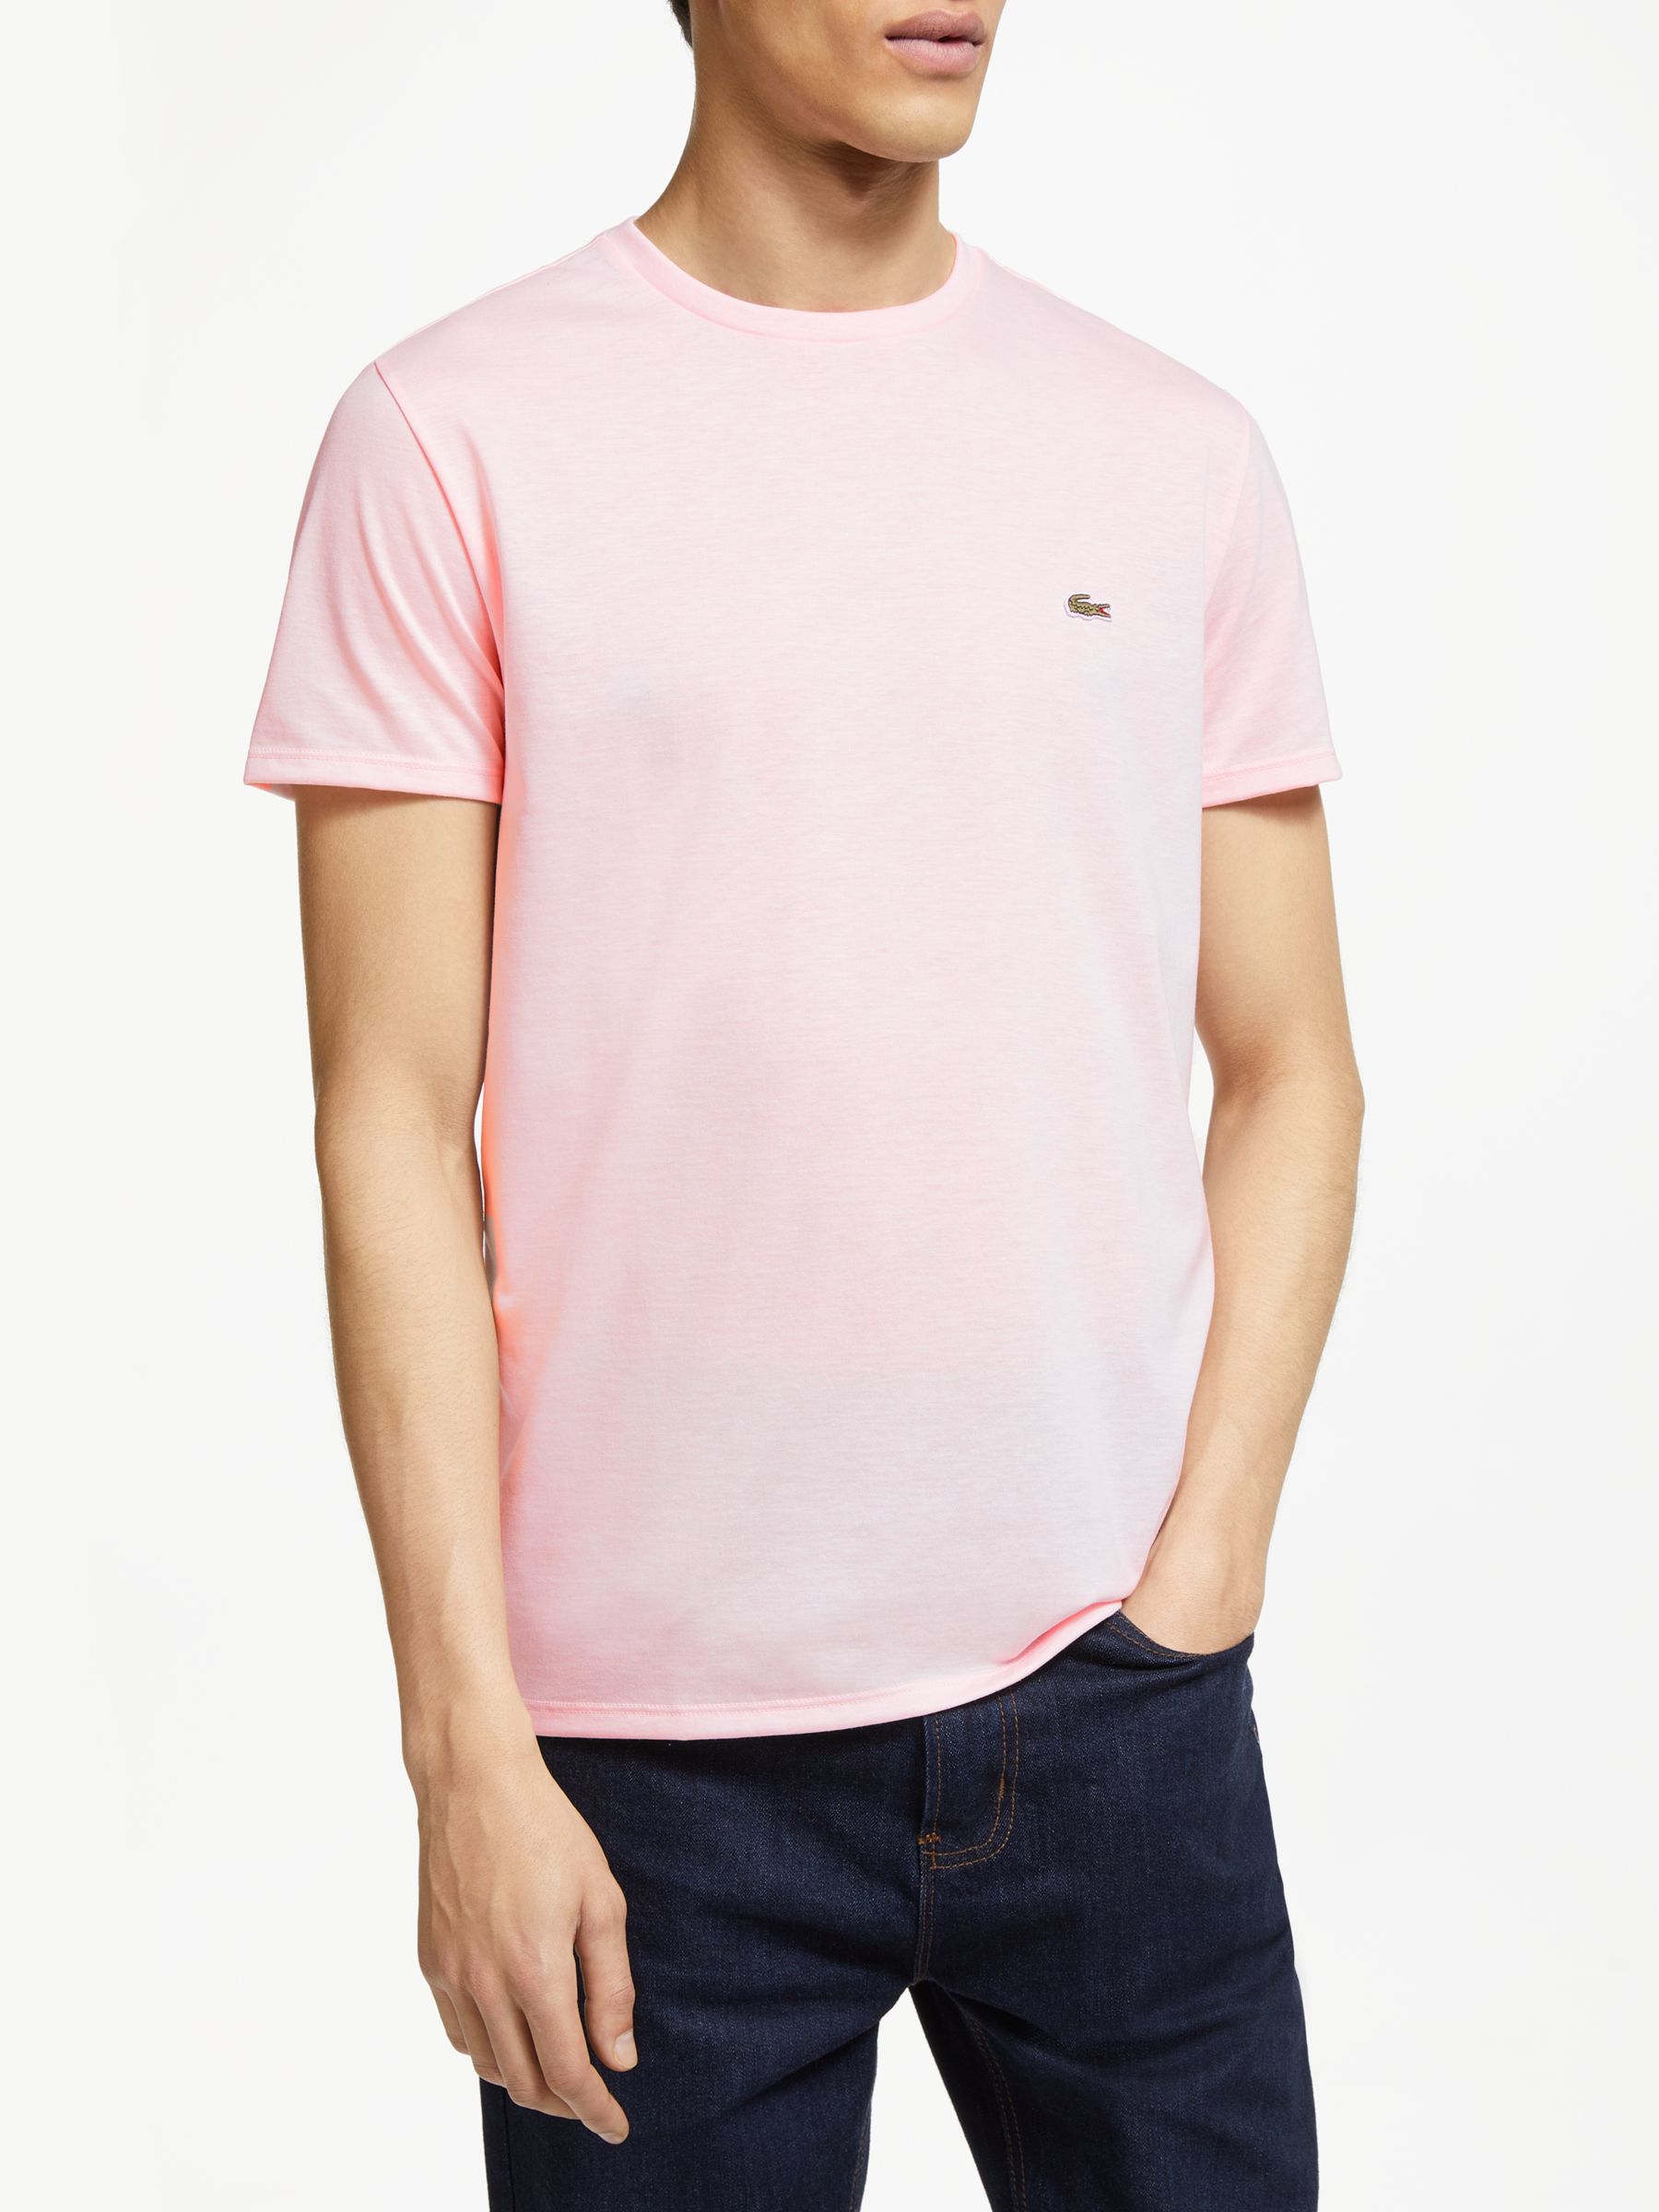 lacoste t shirt pink